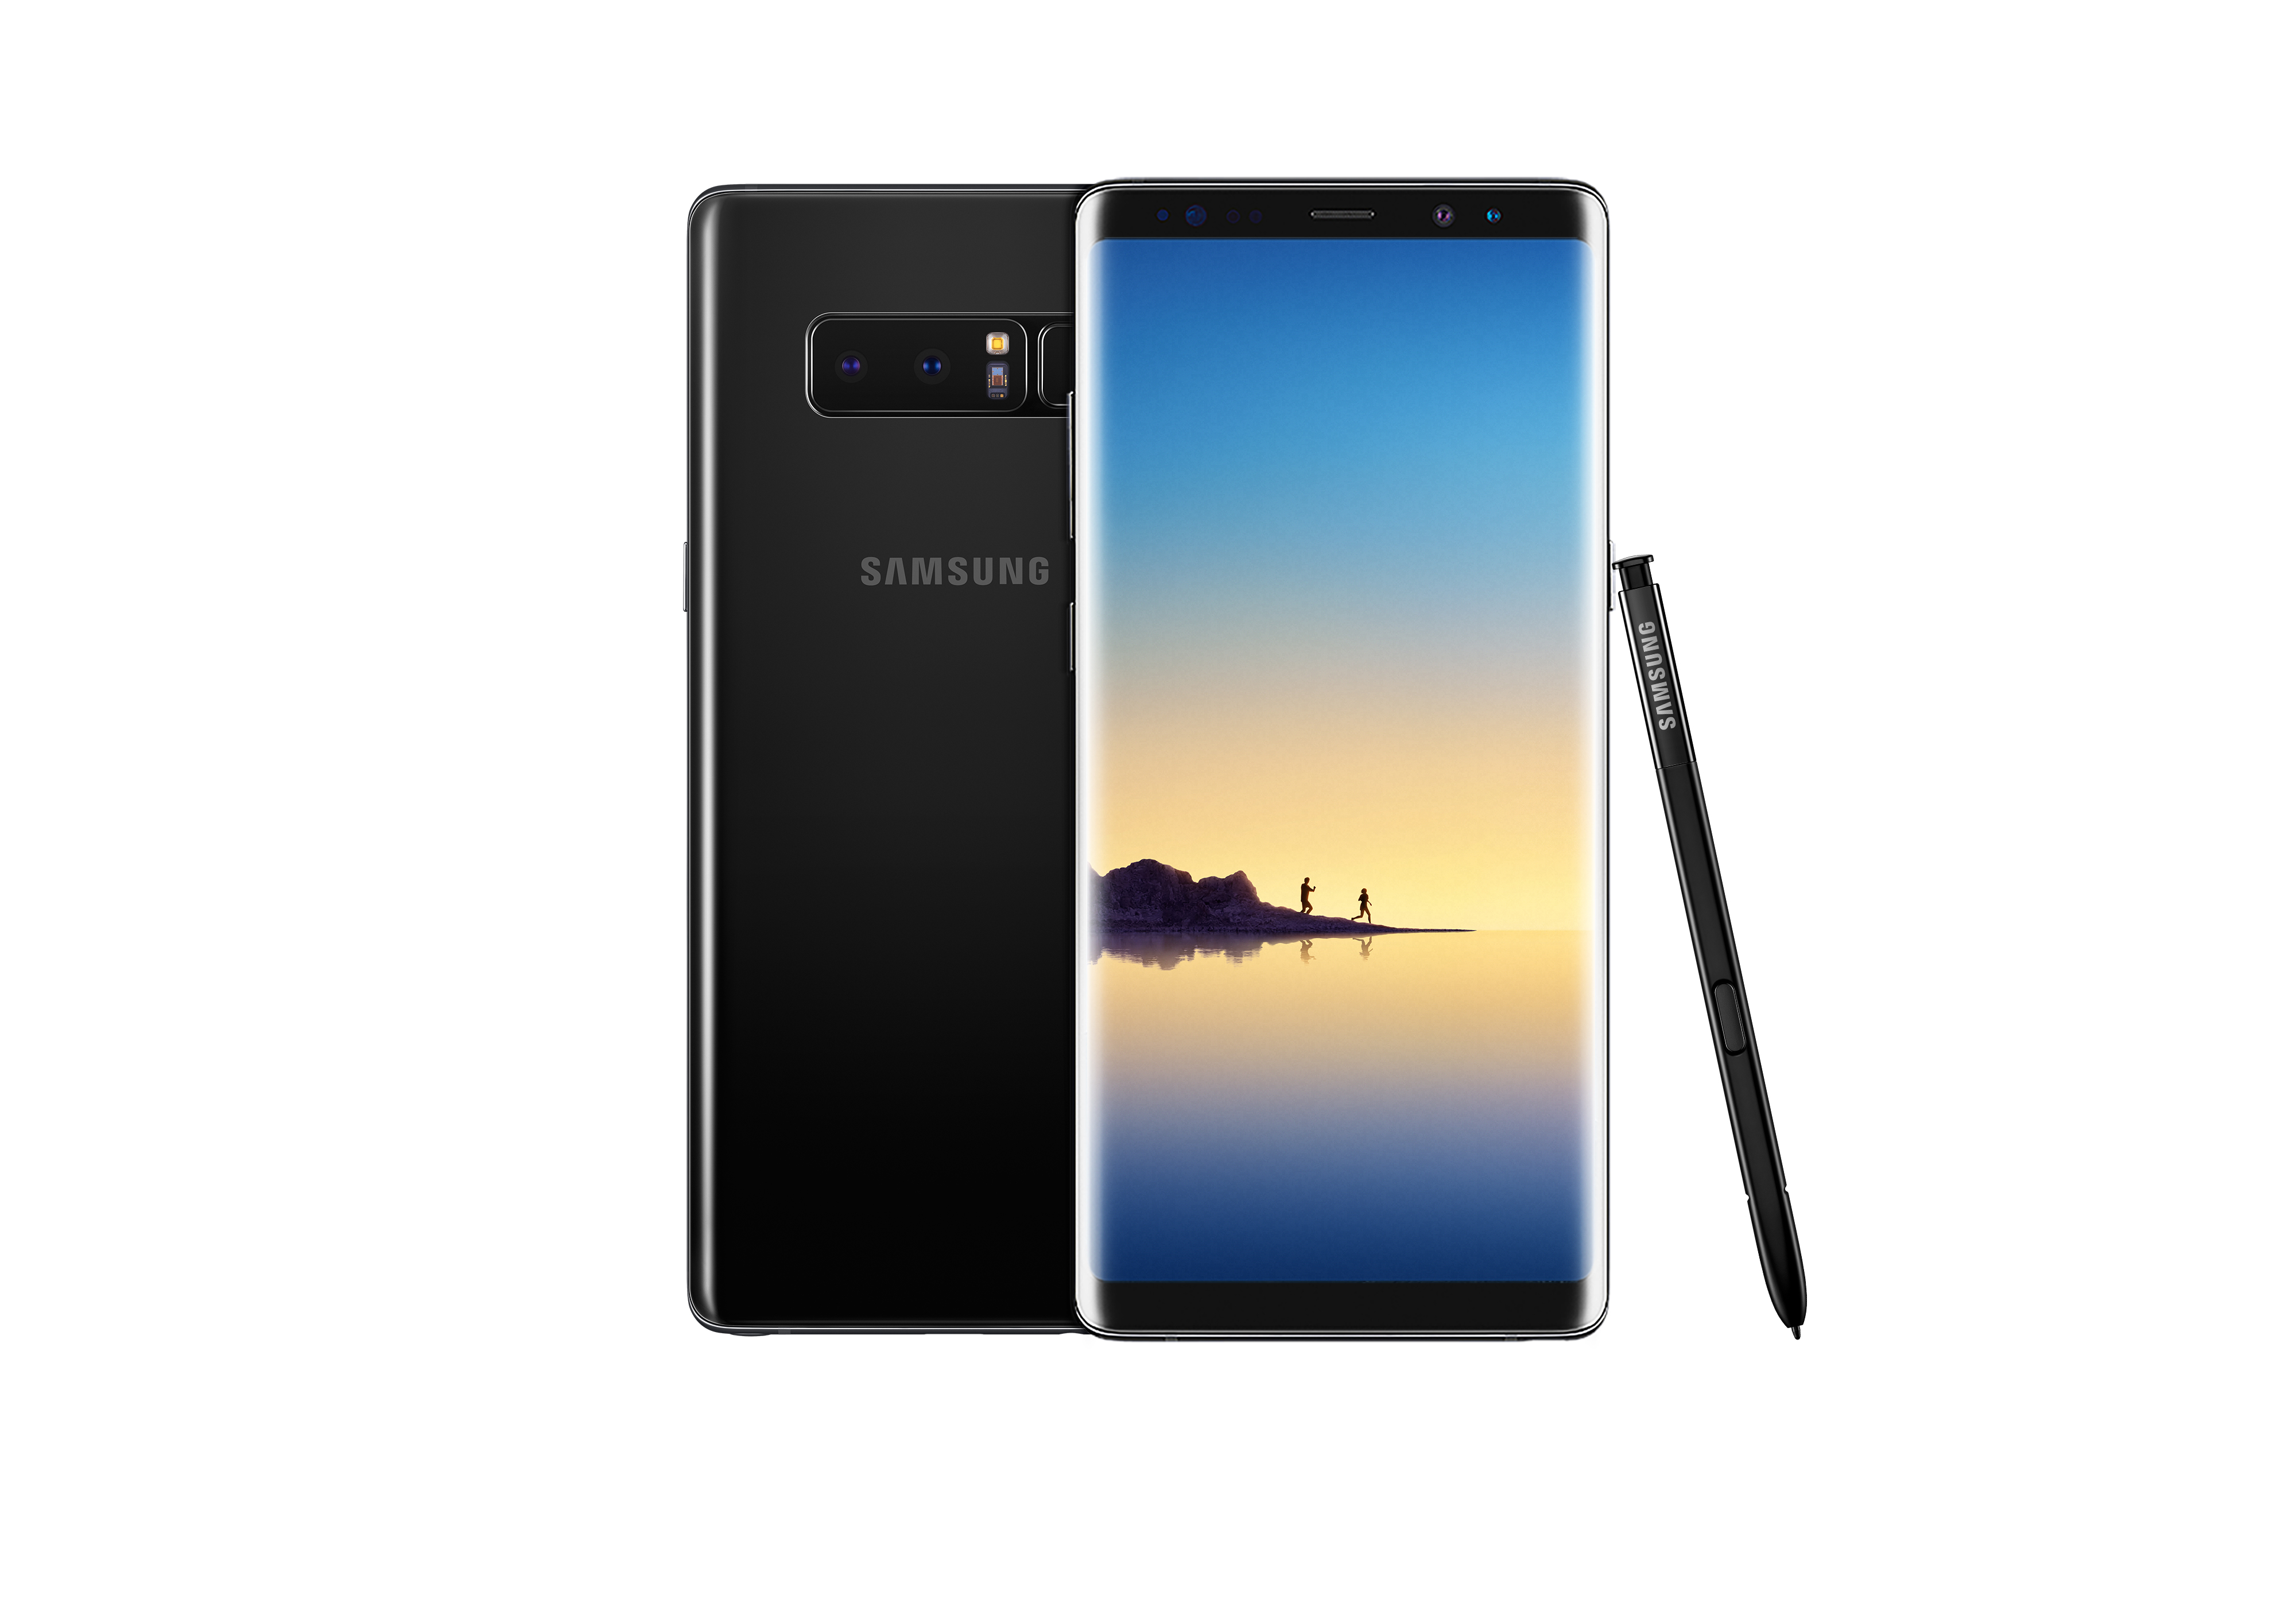 Samsung makes the Galaxy Note8 Official | Ars Technica